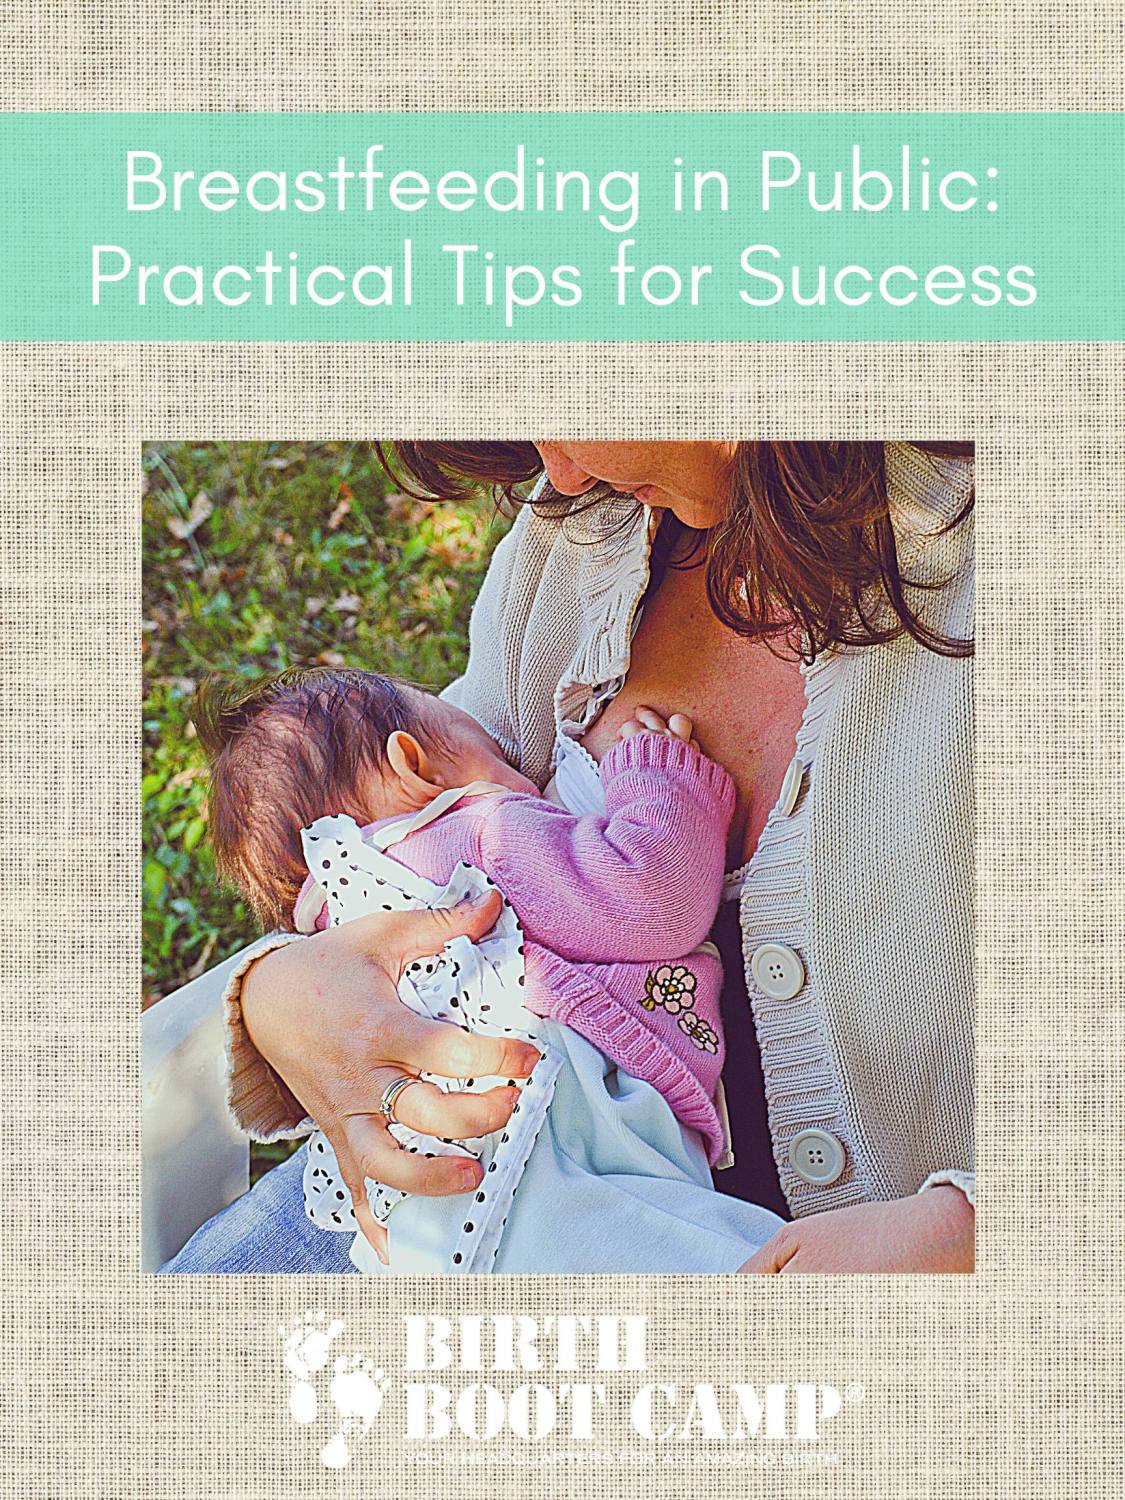 Breastfeeding in Public: 4 Practical Tips for Success